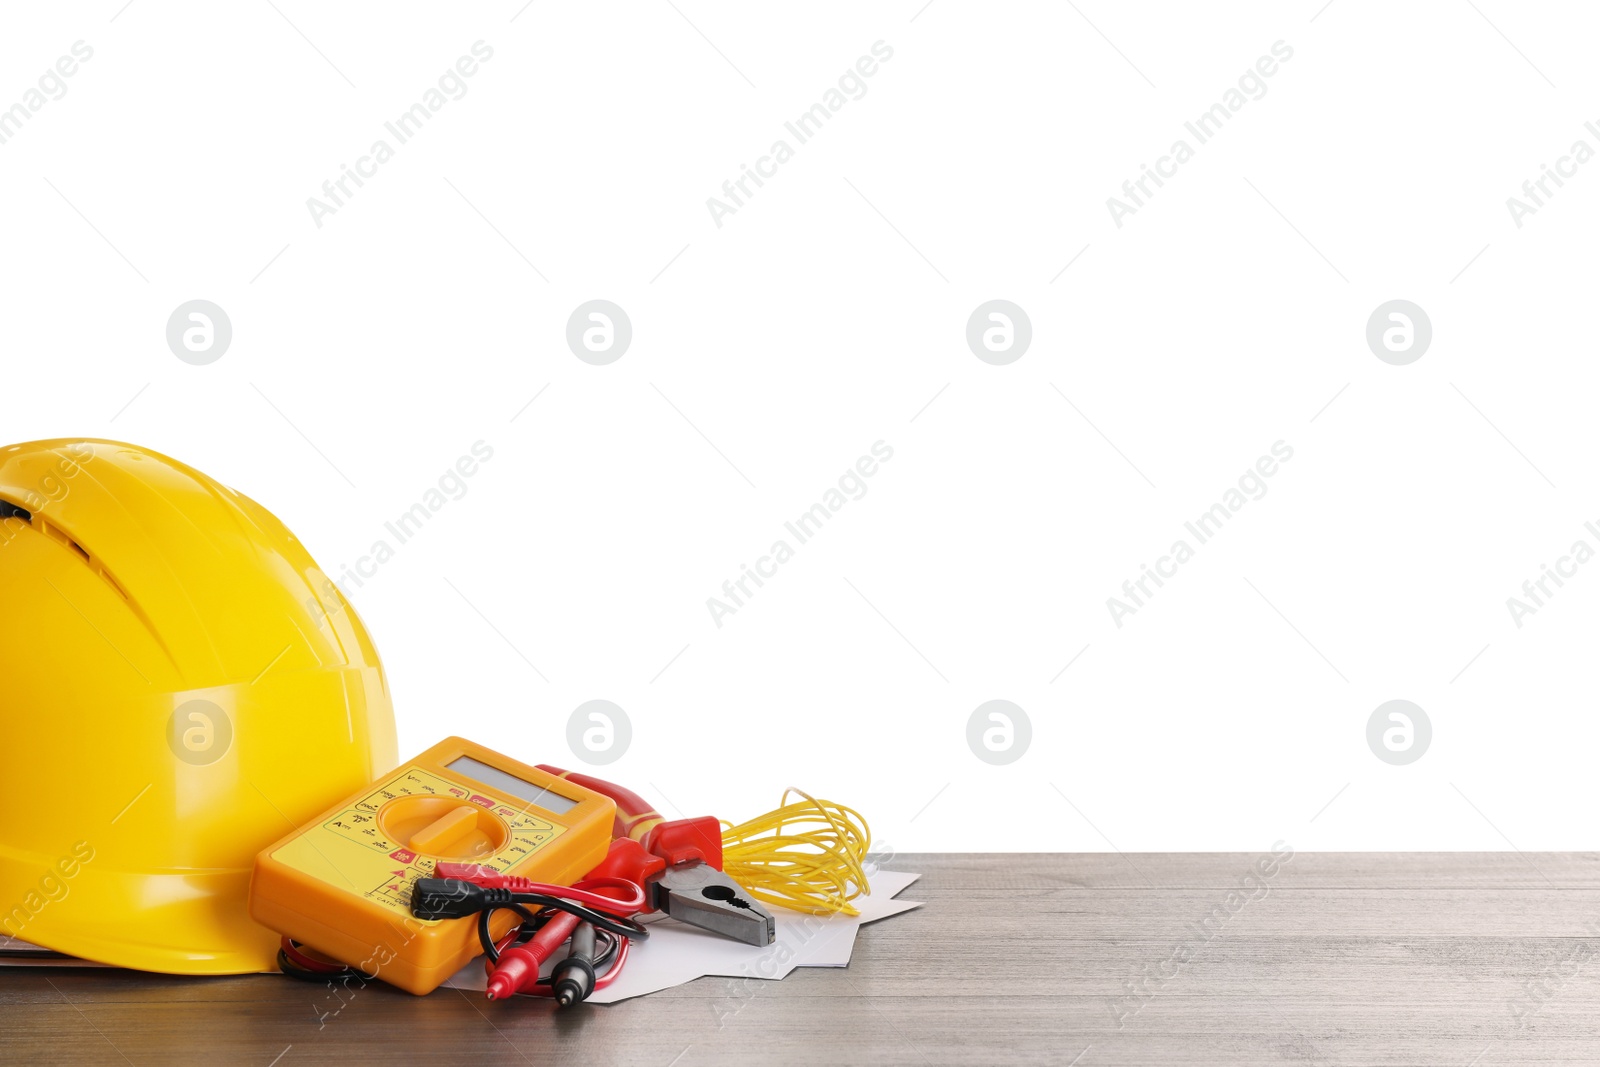 Photo of Set of electrician's tools and accessories on wooden table against white background